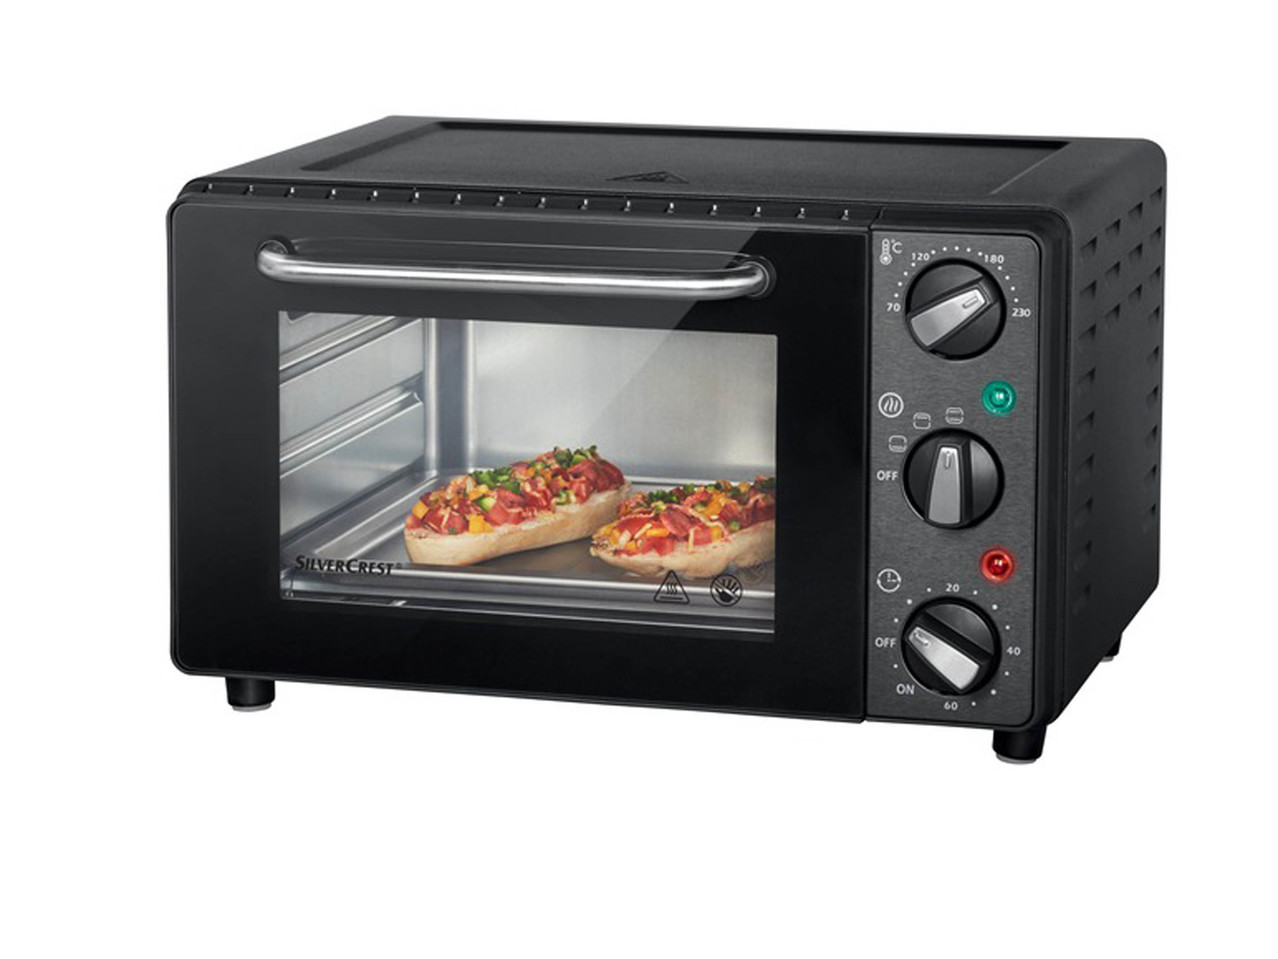 SILVERCREST KITCHEN TOOLS 1300W Electric Oven and Grill